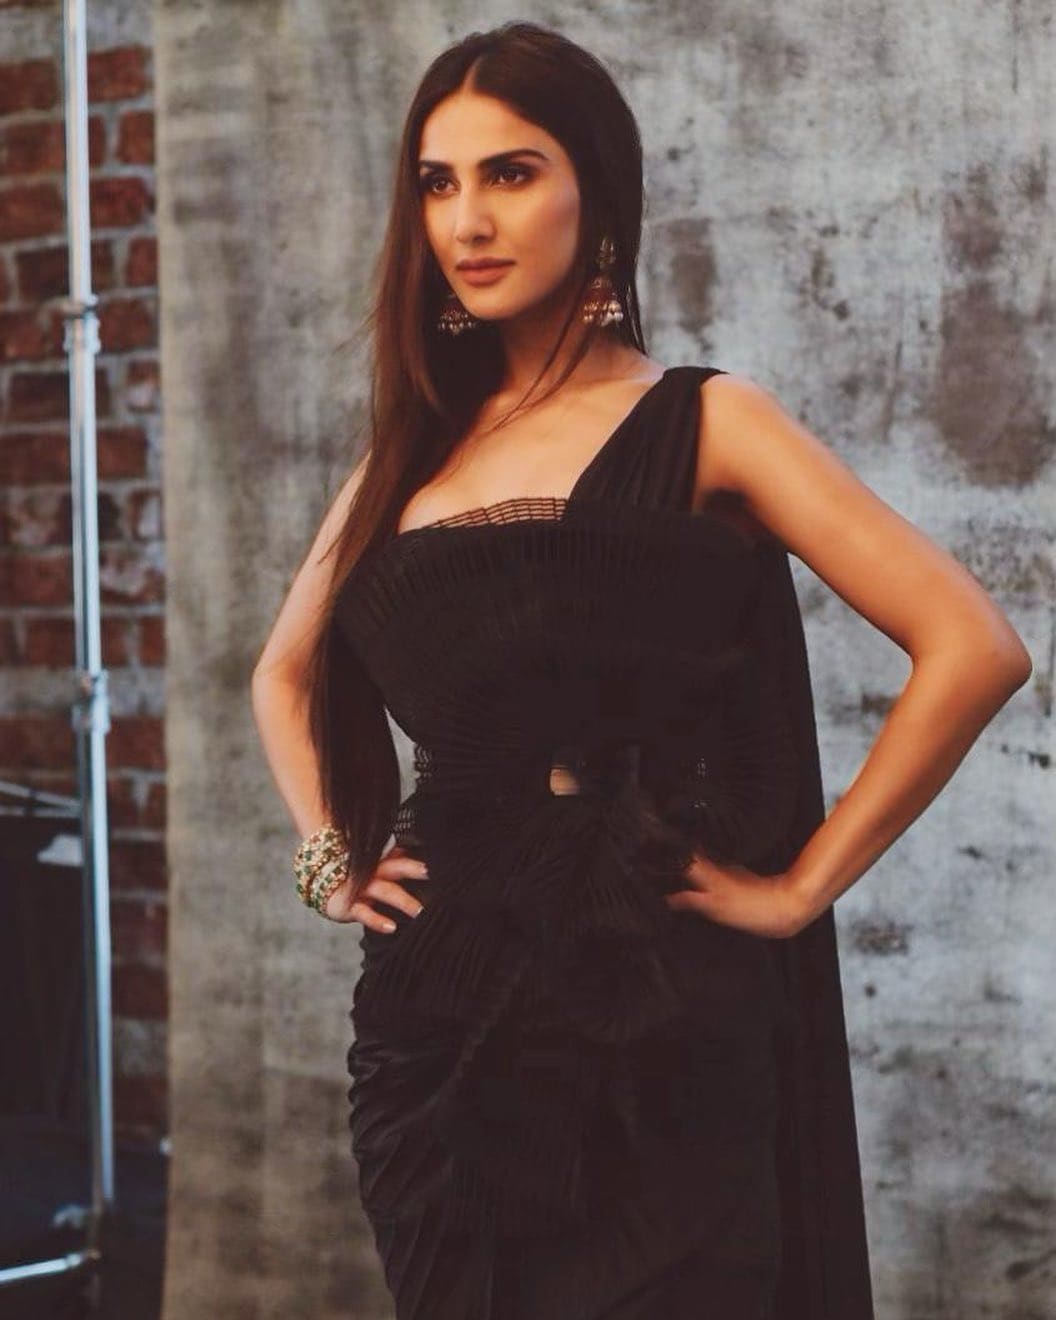 Vaani Kapoor stuns in Rs 74k black saree and bralette for ITA Awards.  Stunning pics - India Today